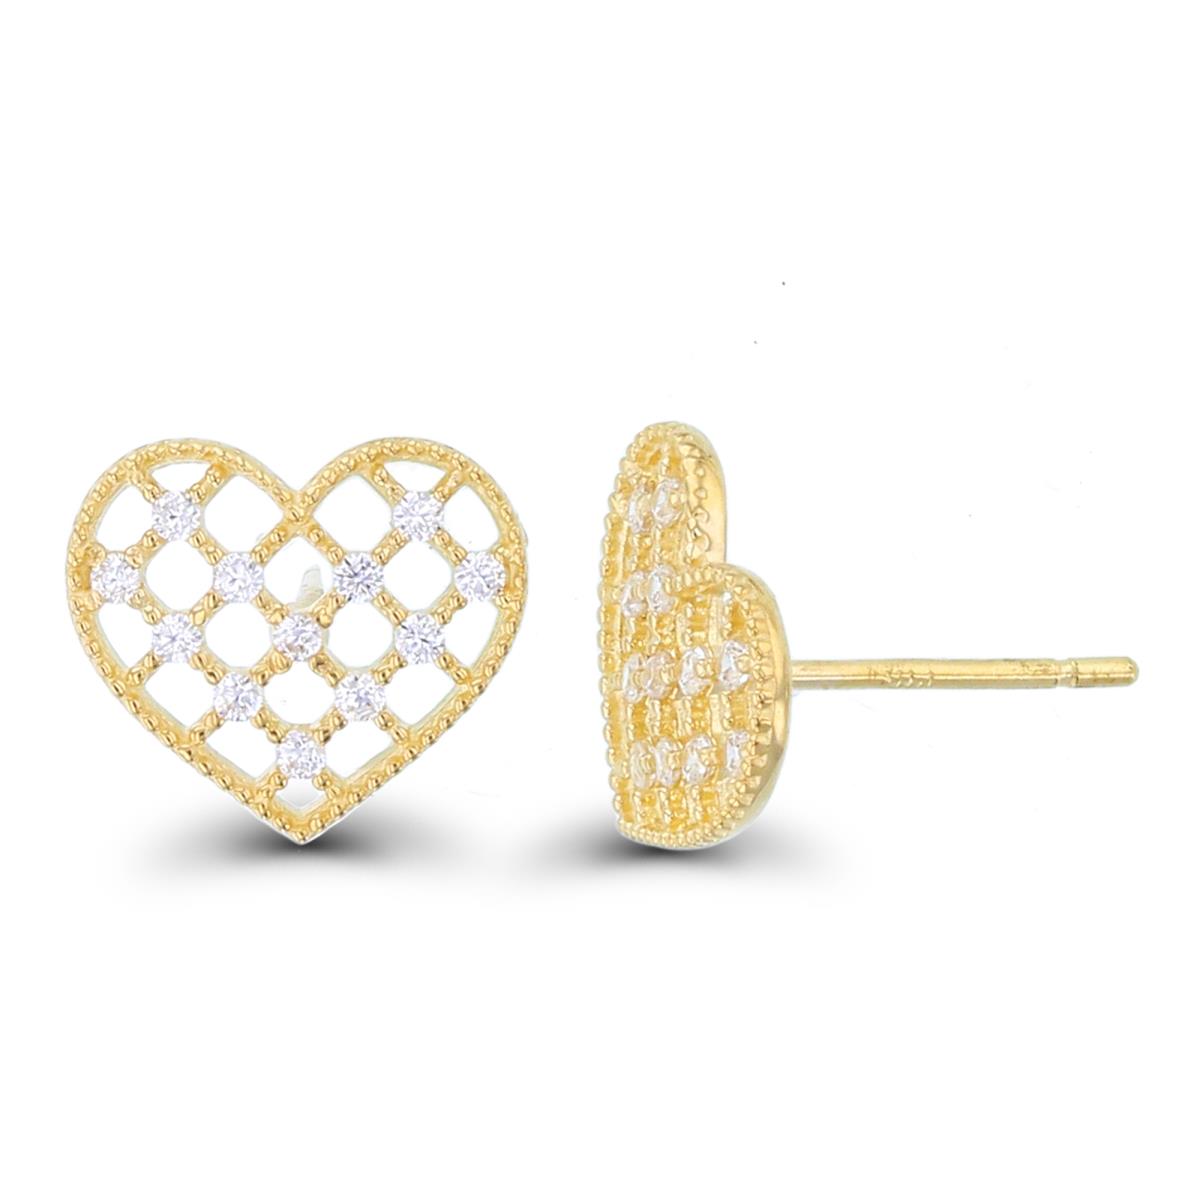 10K Yellow Gold Rnd CZ Scattered Milgrain Heart Studs with Silicon Backs